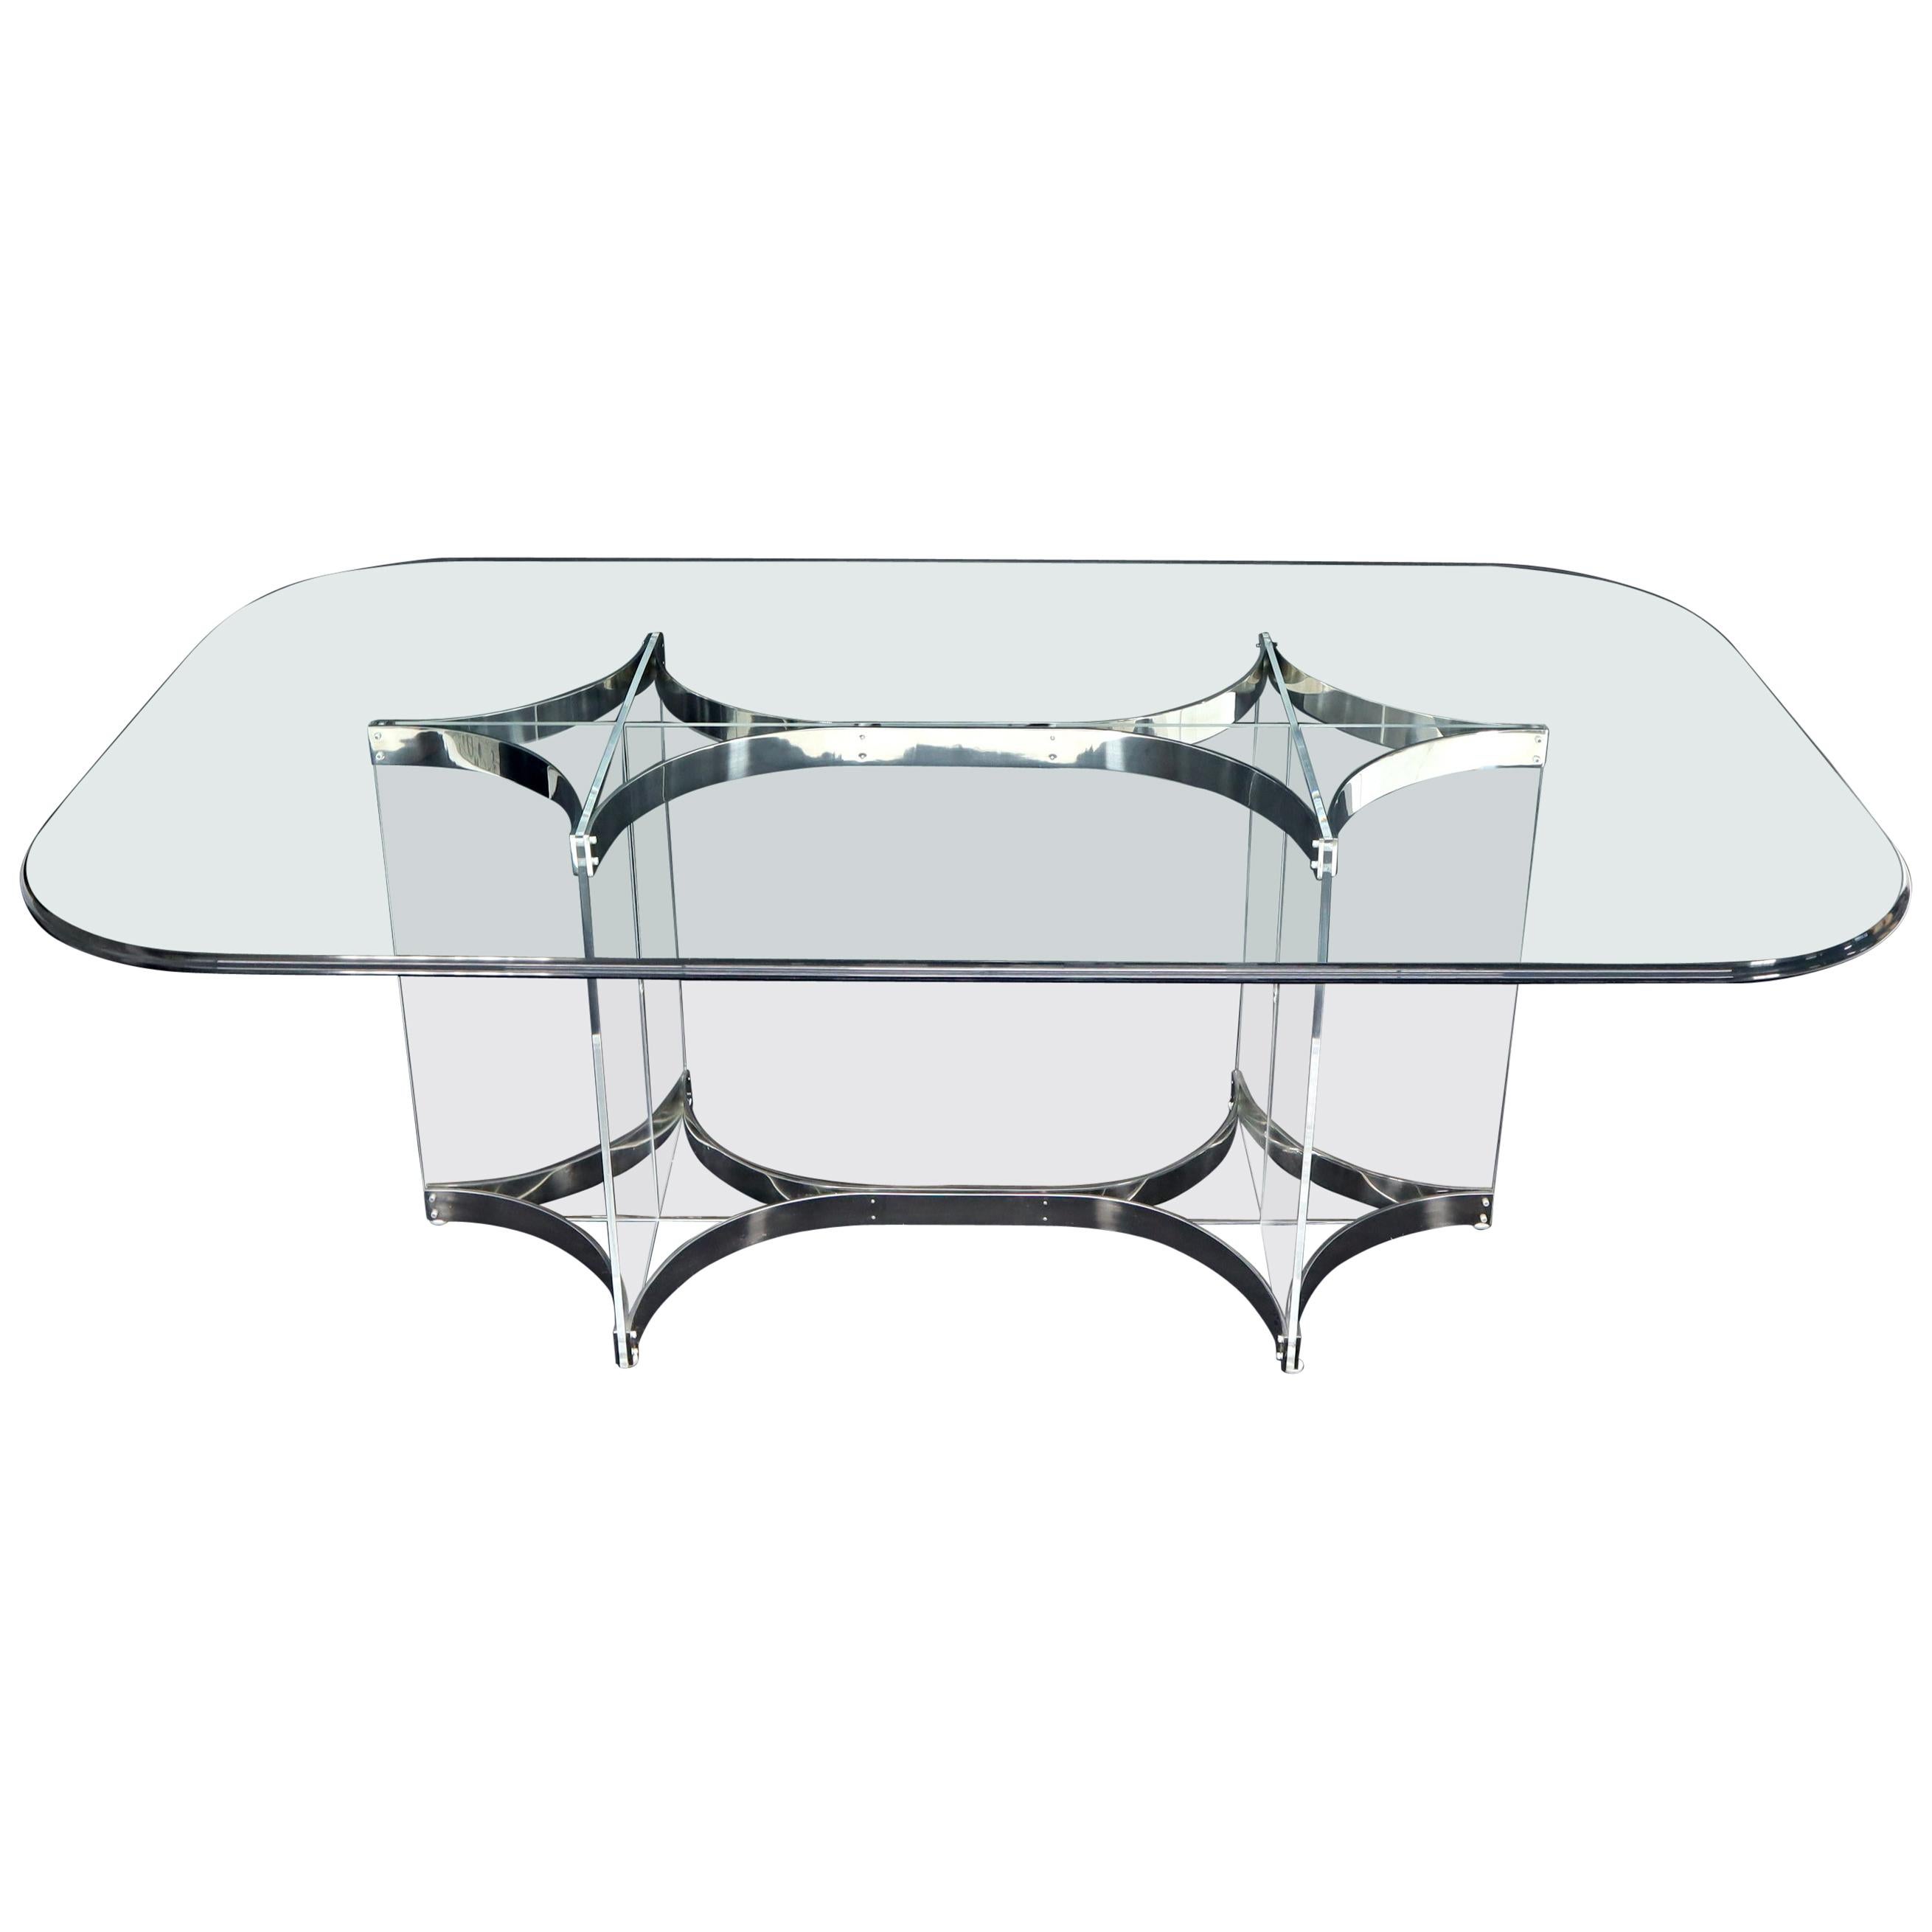 Large Glass Top Lucite & Stainless Base Rectangle Dining Table w/ Rounded Corner